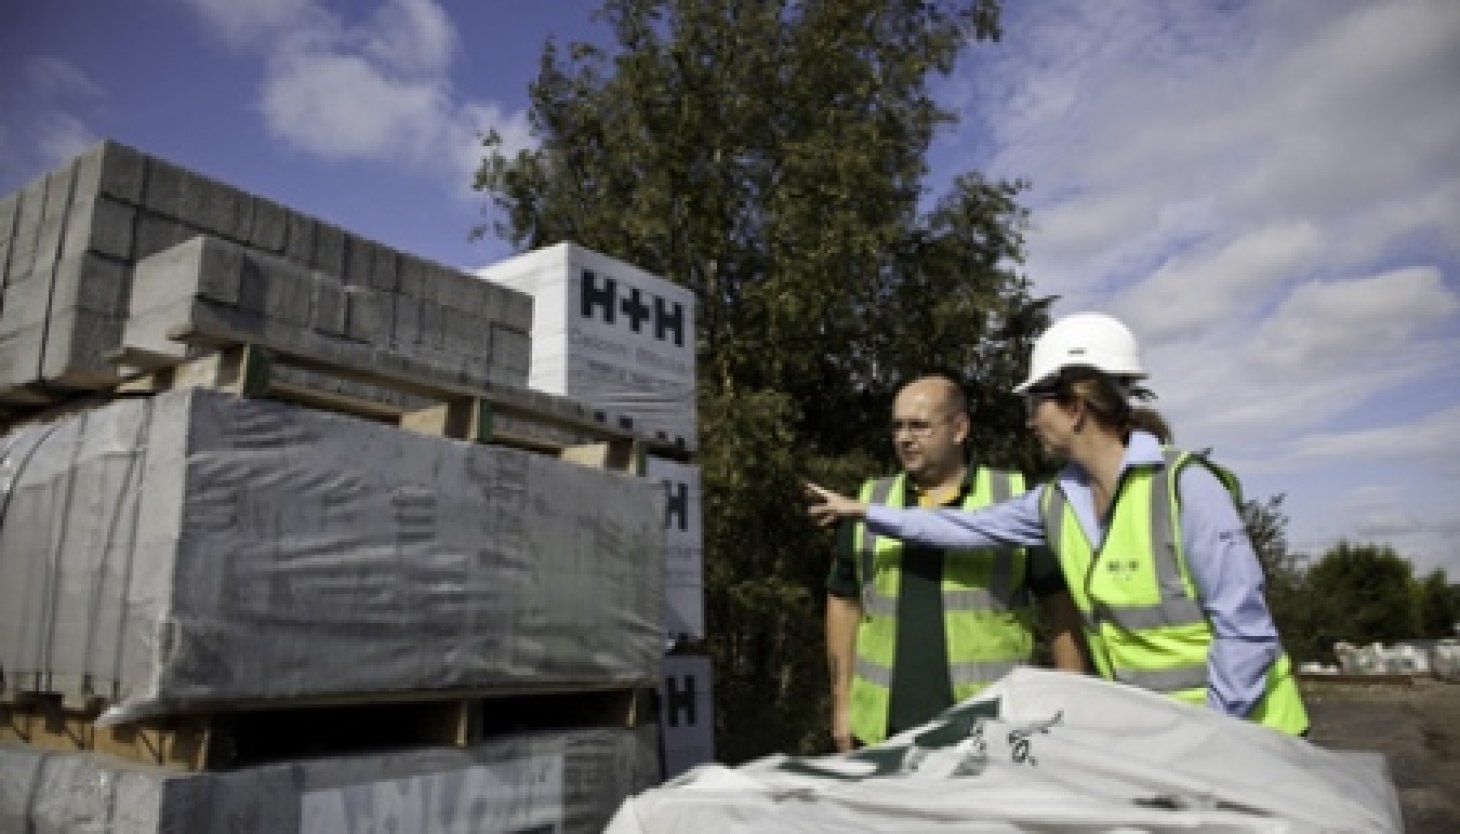 Pallet recycling takes off